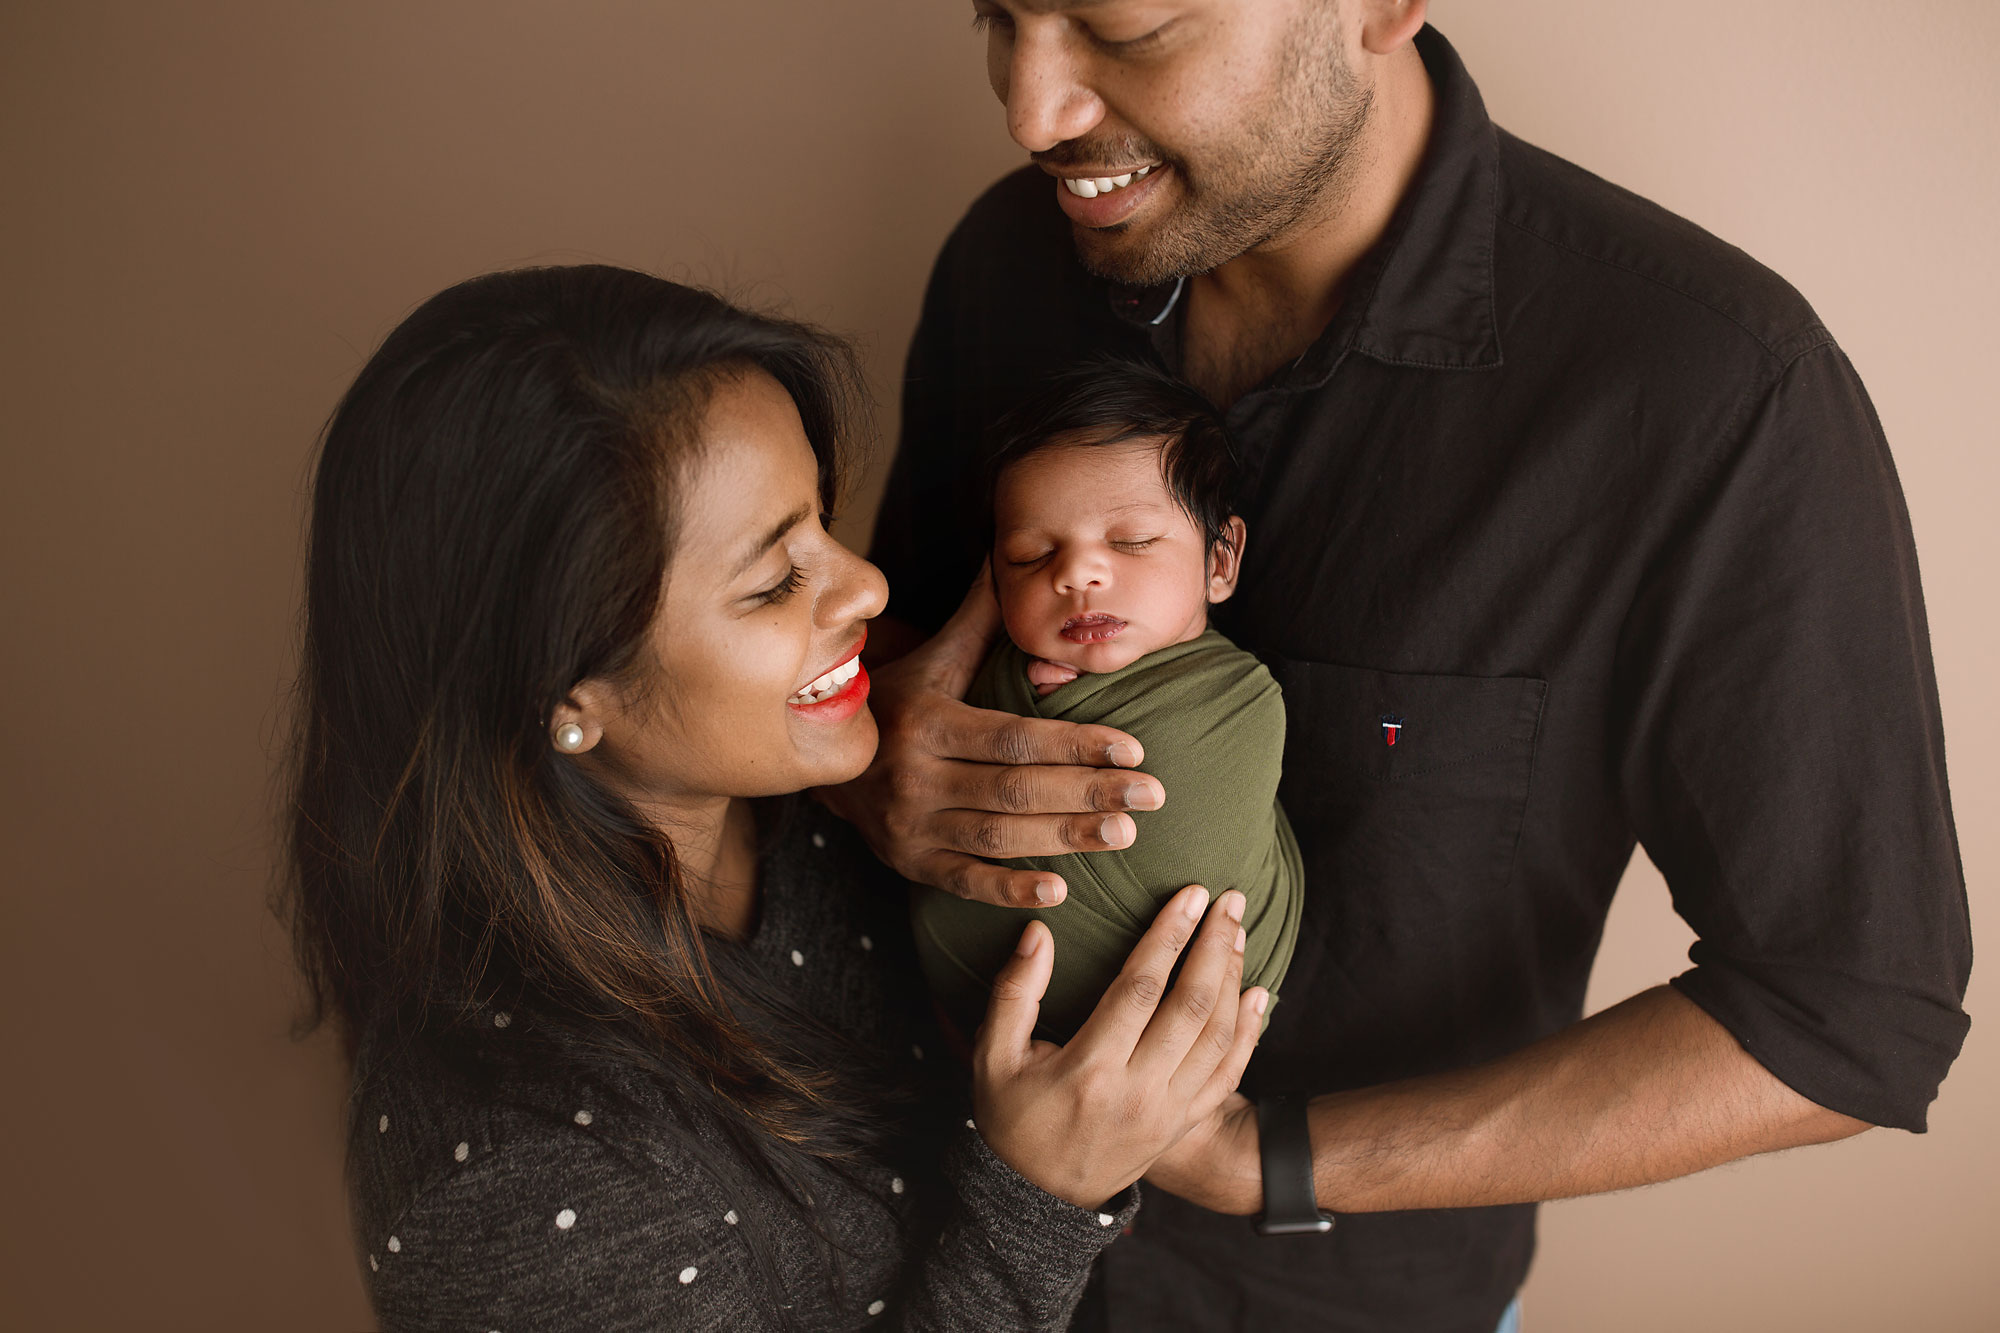 newborn and family pictures lehigh valley, mom and dad holding newborn baby and smiling